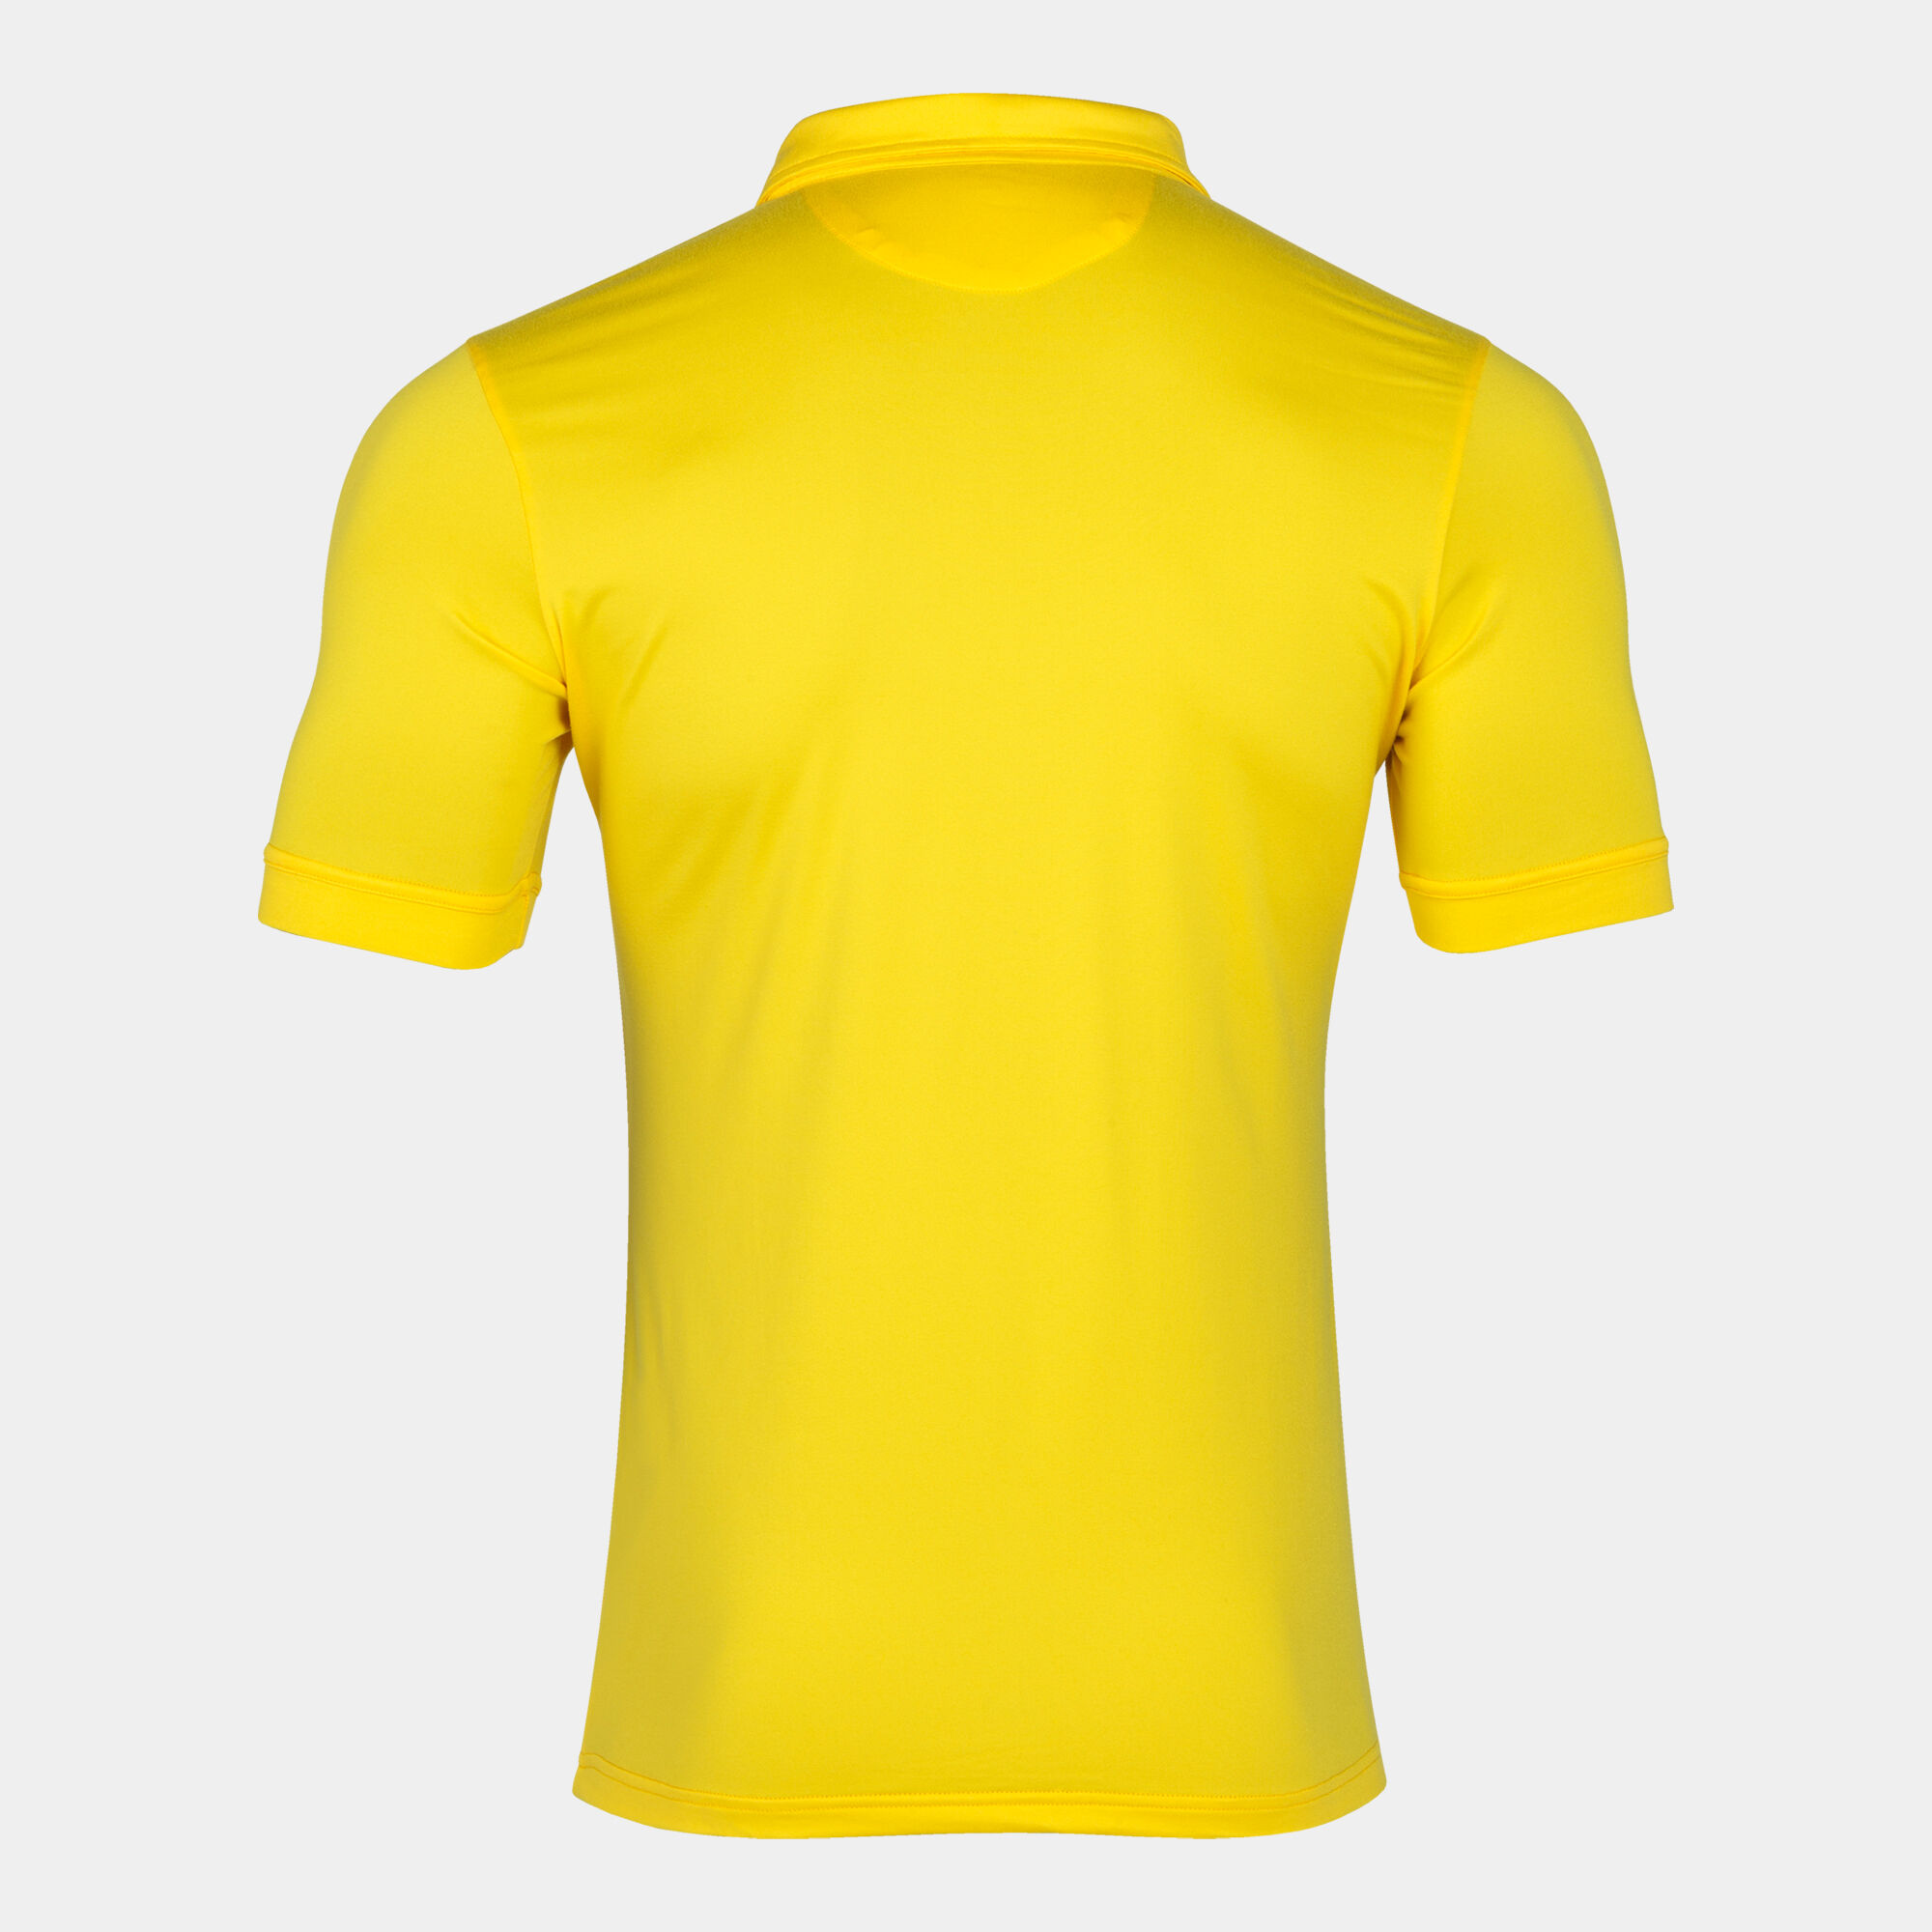 MAILLOT MANCHES COURTES HOMME GOLD II JAUNE